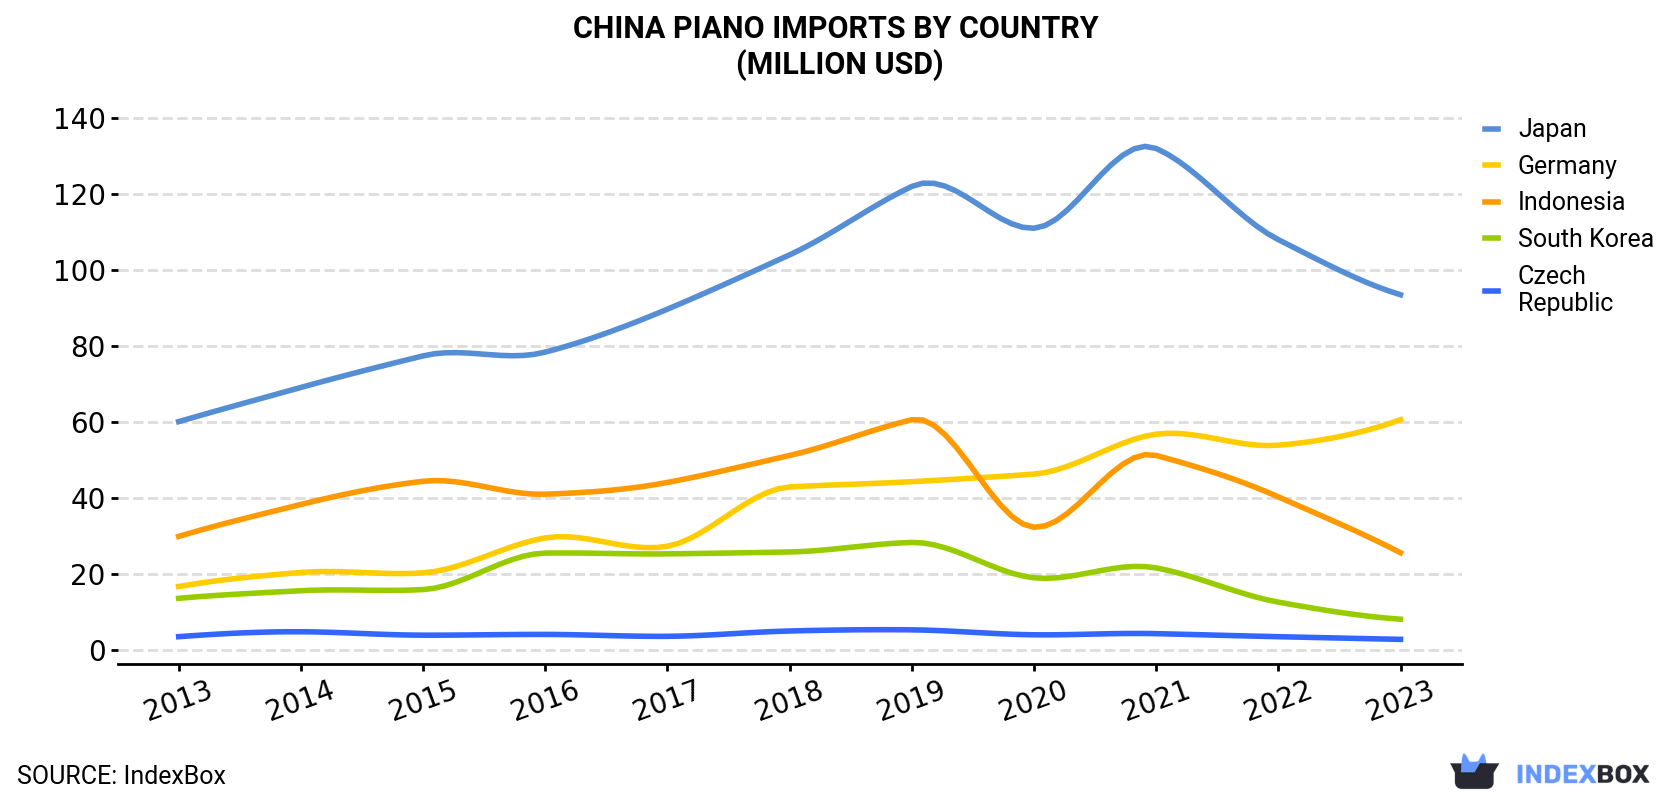 China Piano Imports By Country (Million USD)